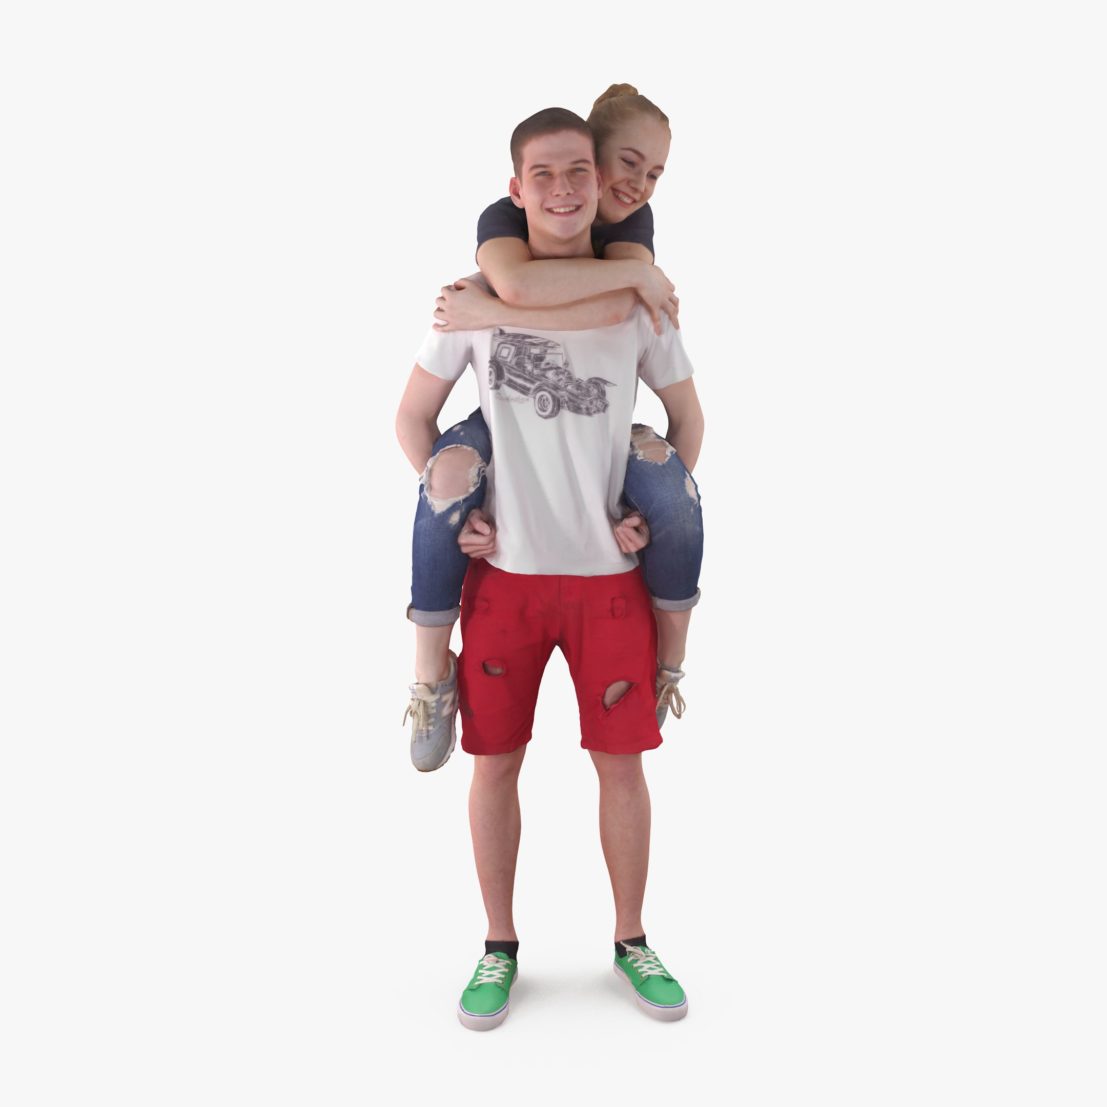 Young Couple 3D Model | 3DTree Scanning Studio